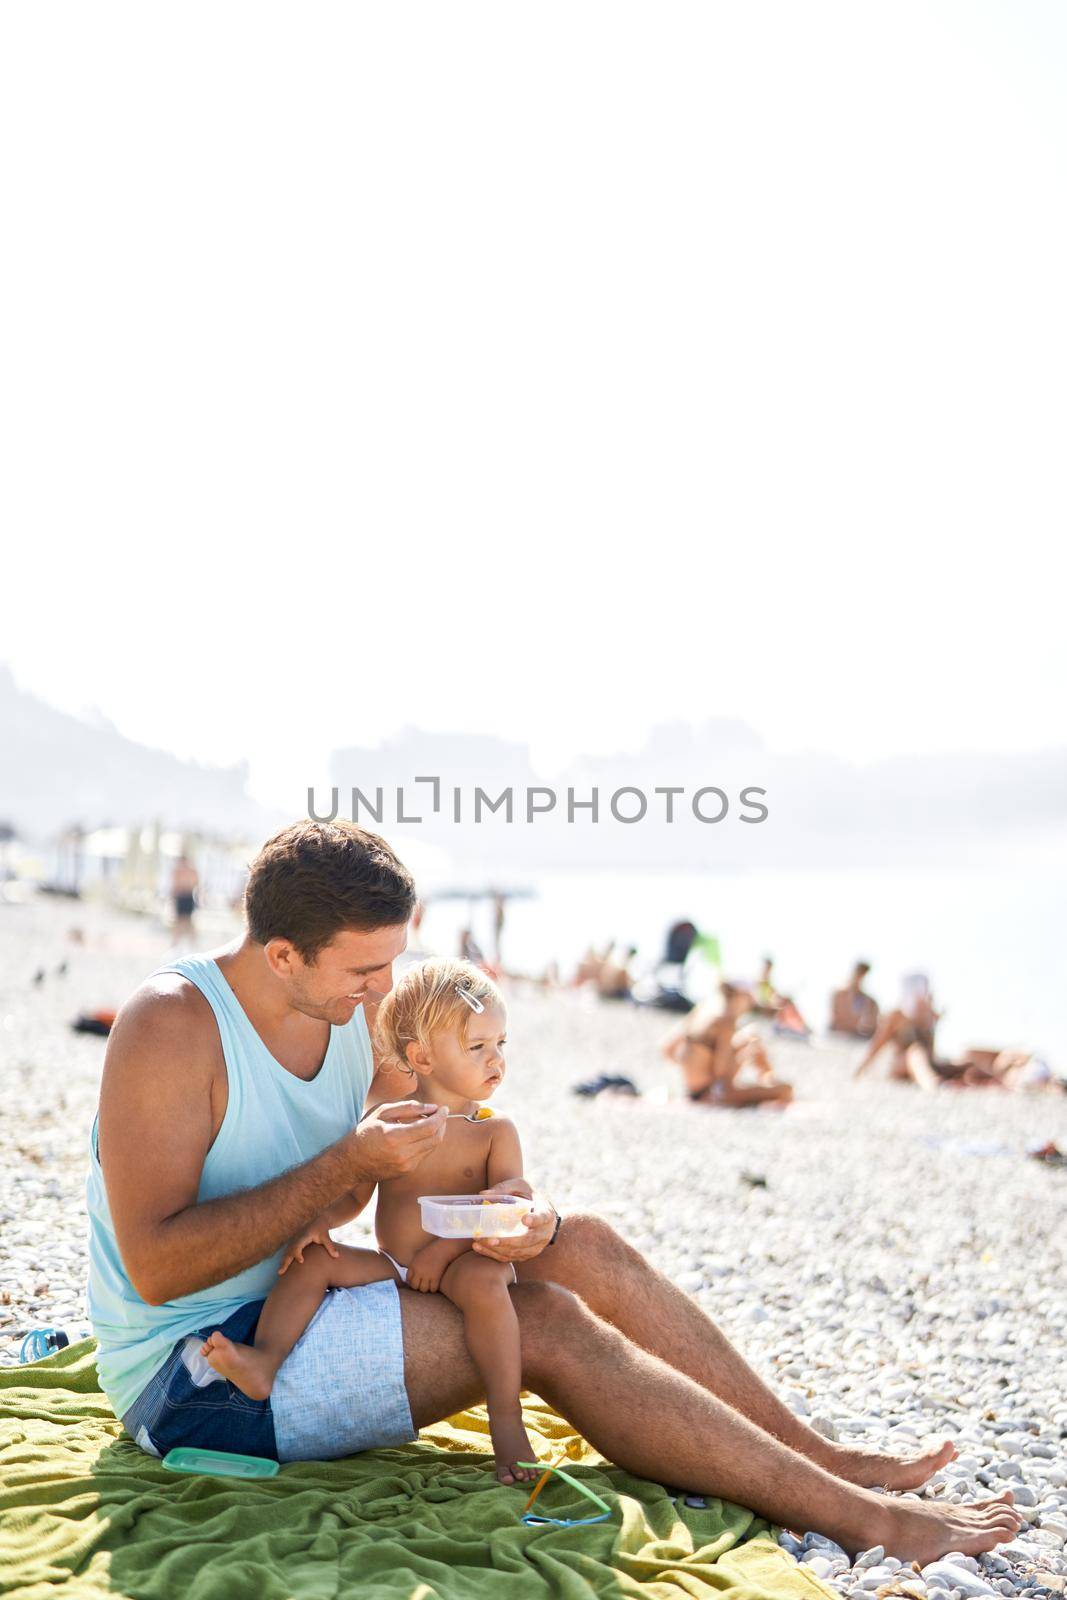 Smiling dad feeding little girl from spoon by Nadtochiy